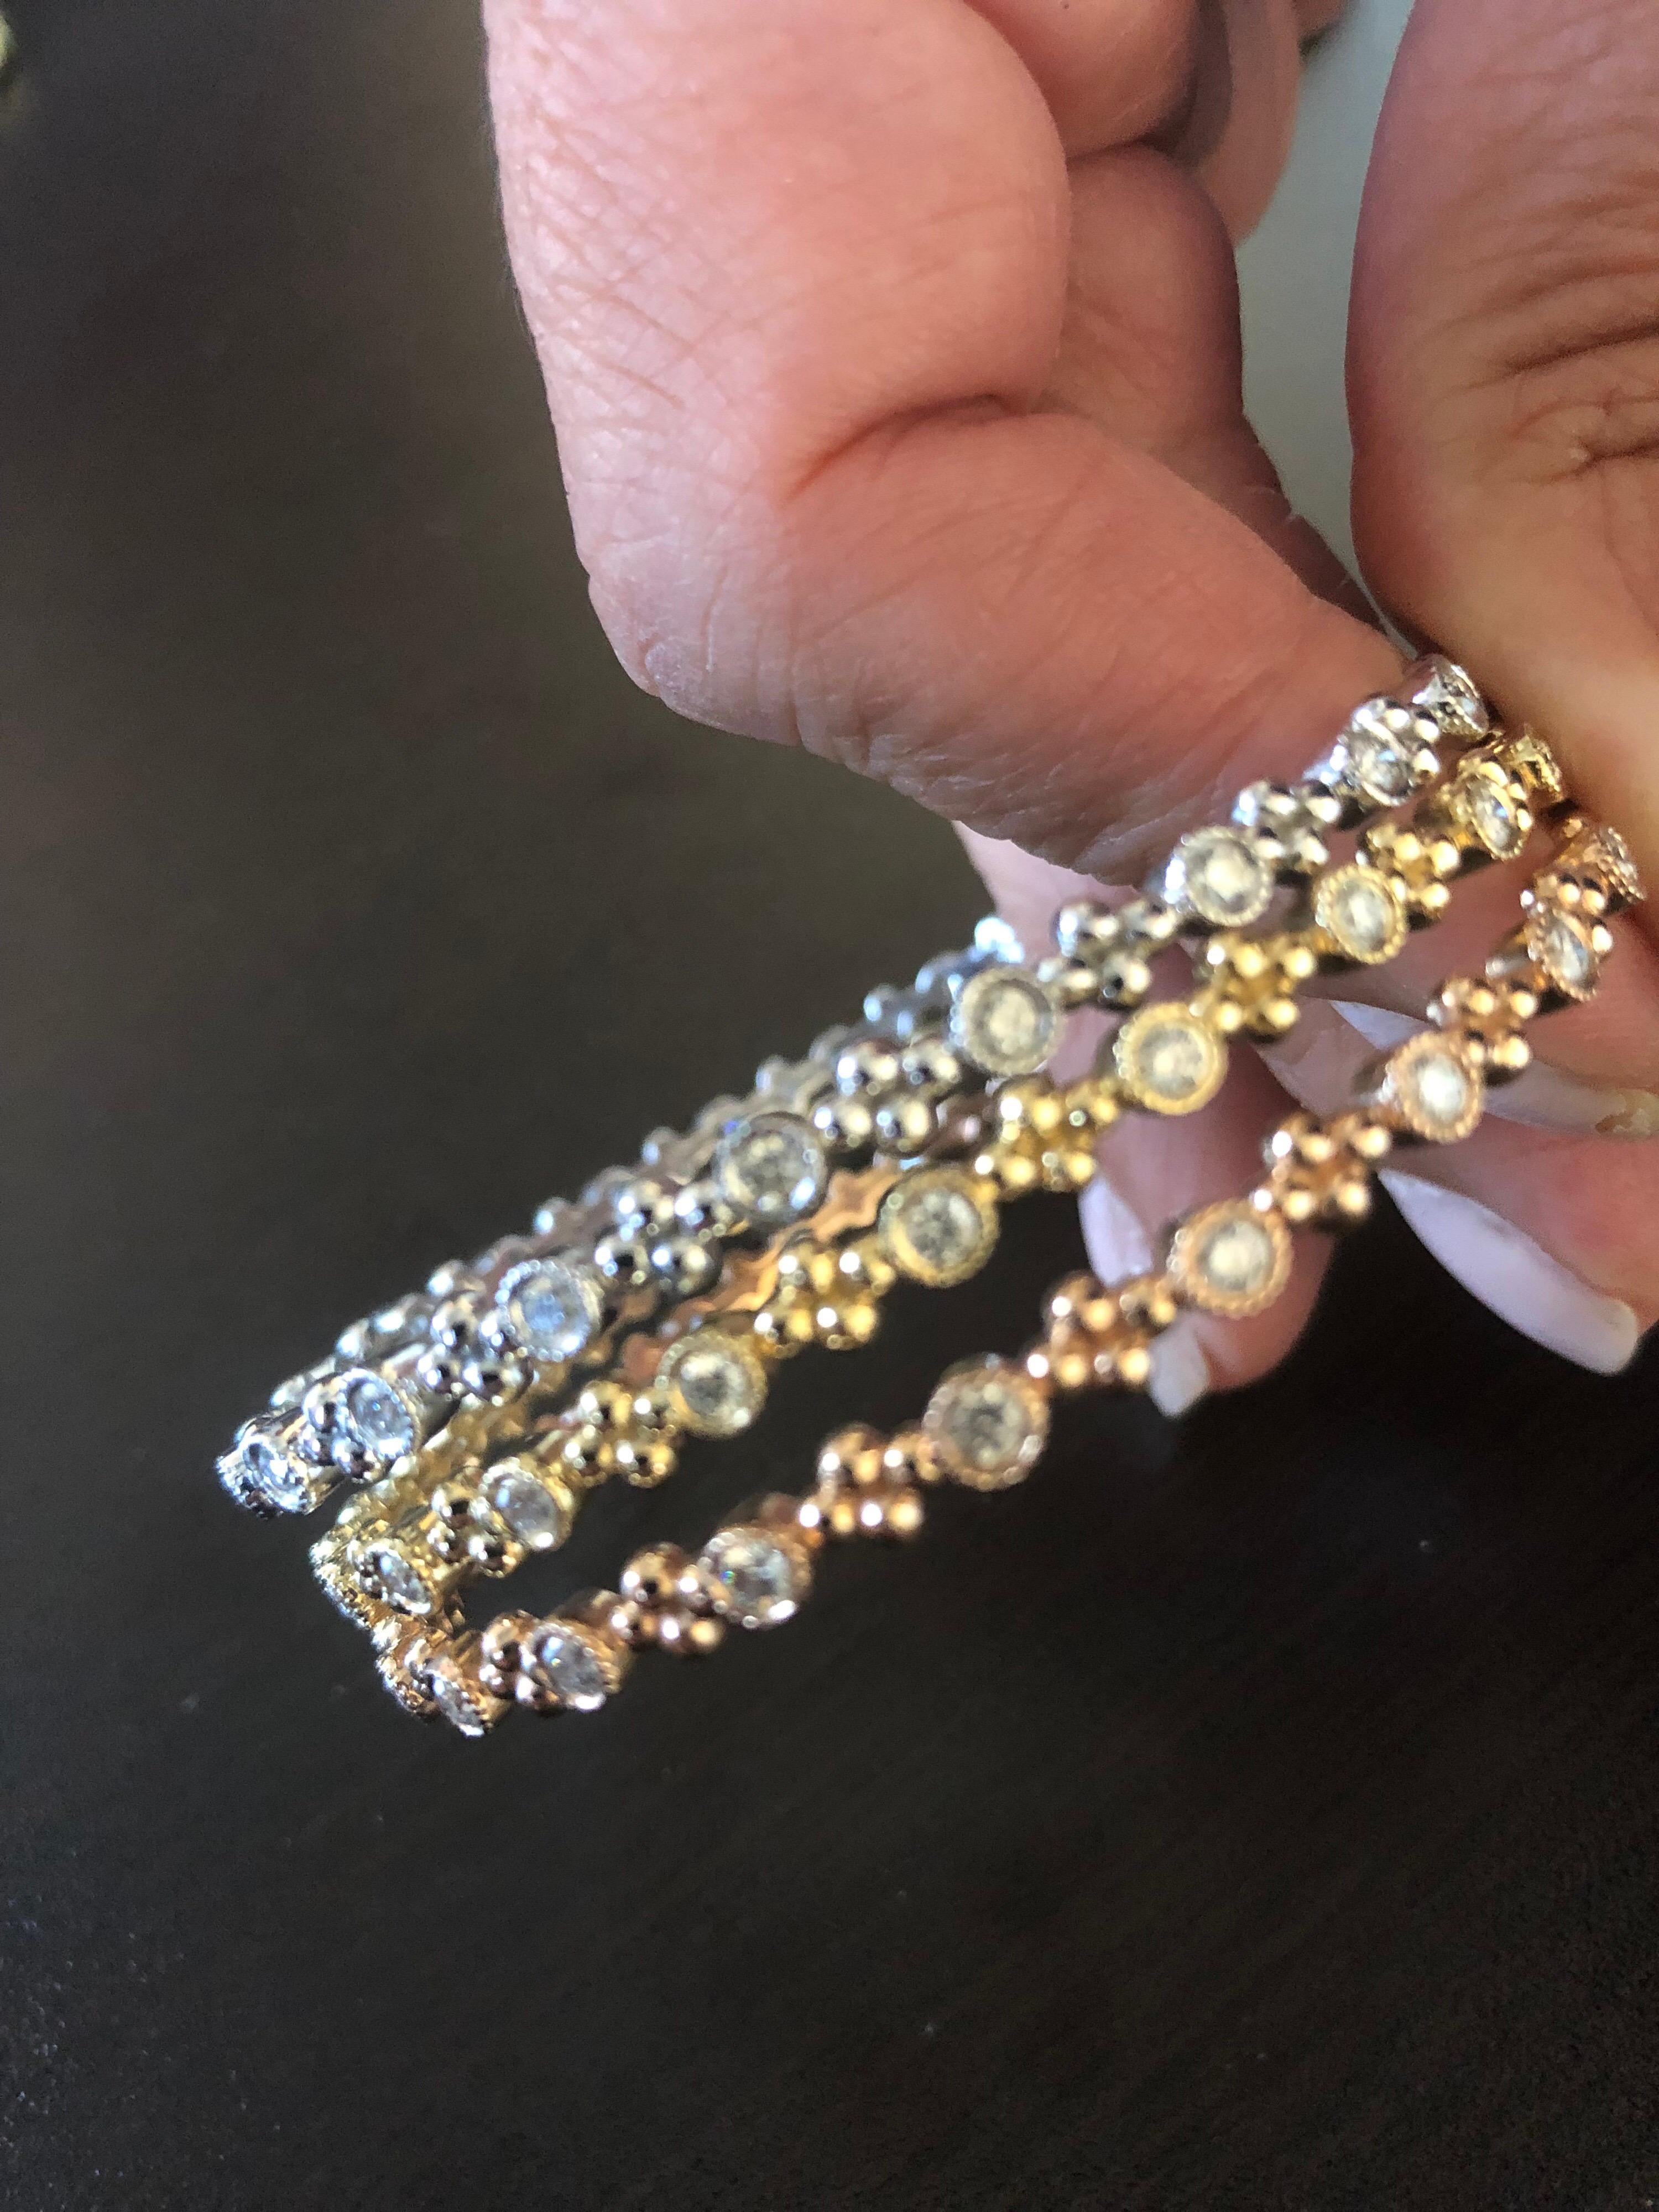 Slip on diamond bangles sold individually. Each stone is set in an engraved bezel. The total carat weight of each bangle is 1.15. The color of the stones are G-H, clarity is SI1-SI2. The bangles are measured at 2 1/2 inches in diameter, but can be